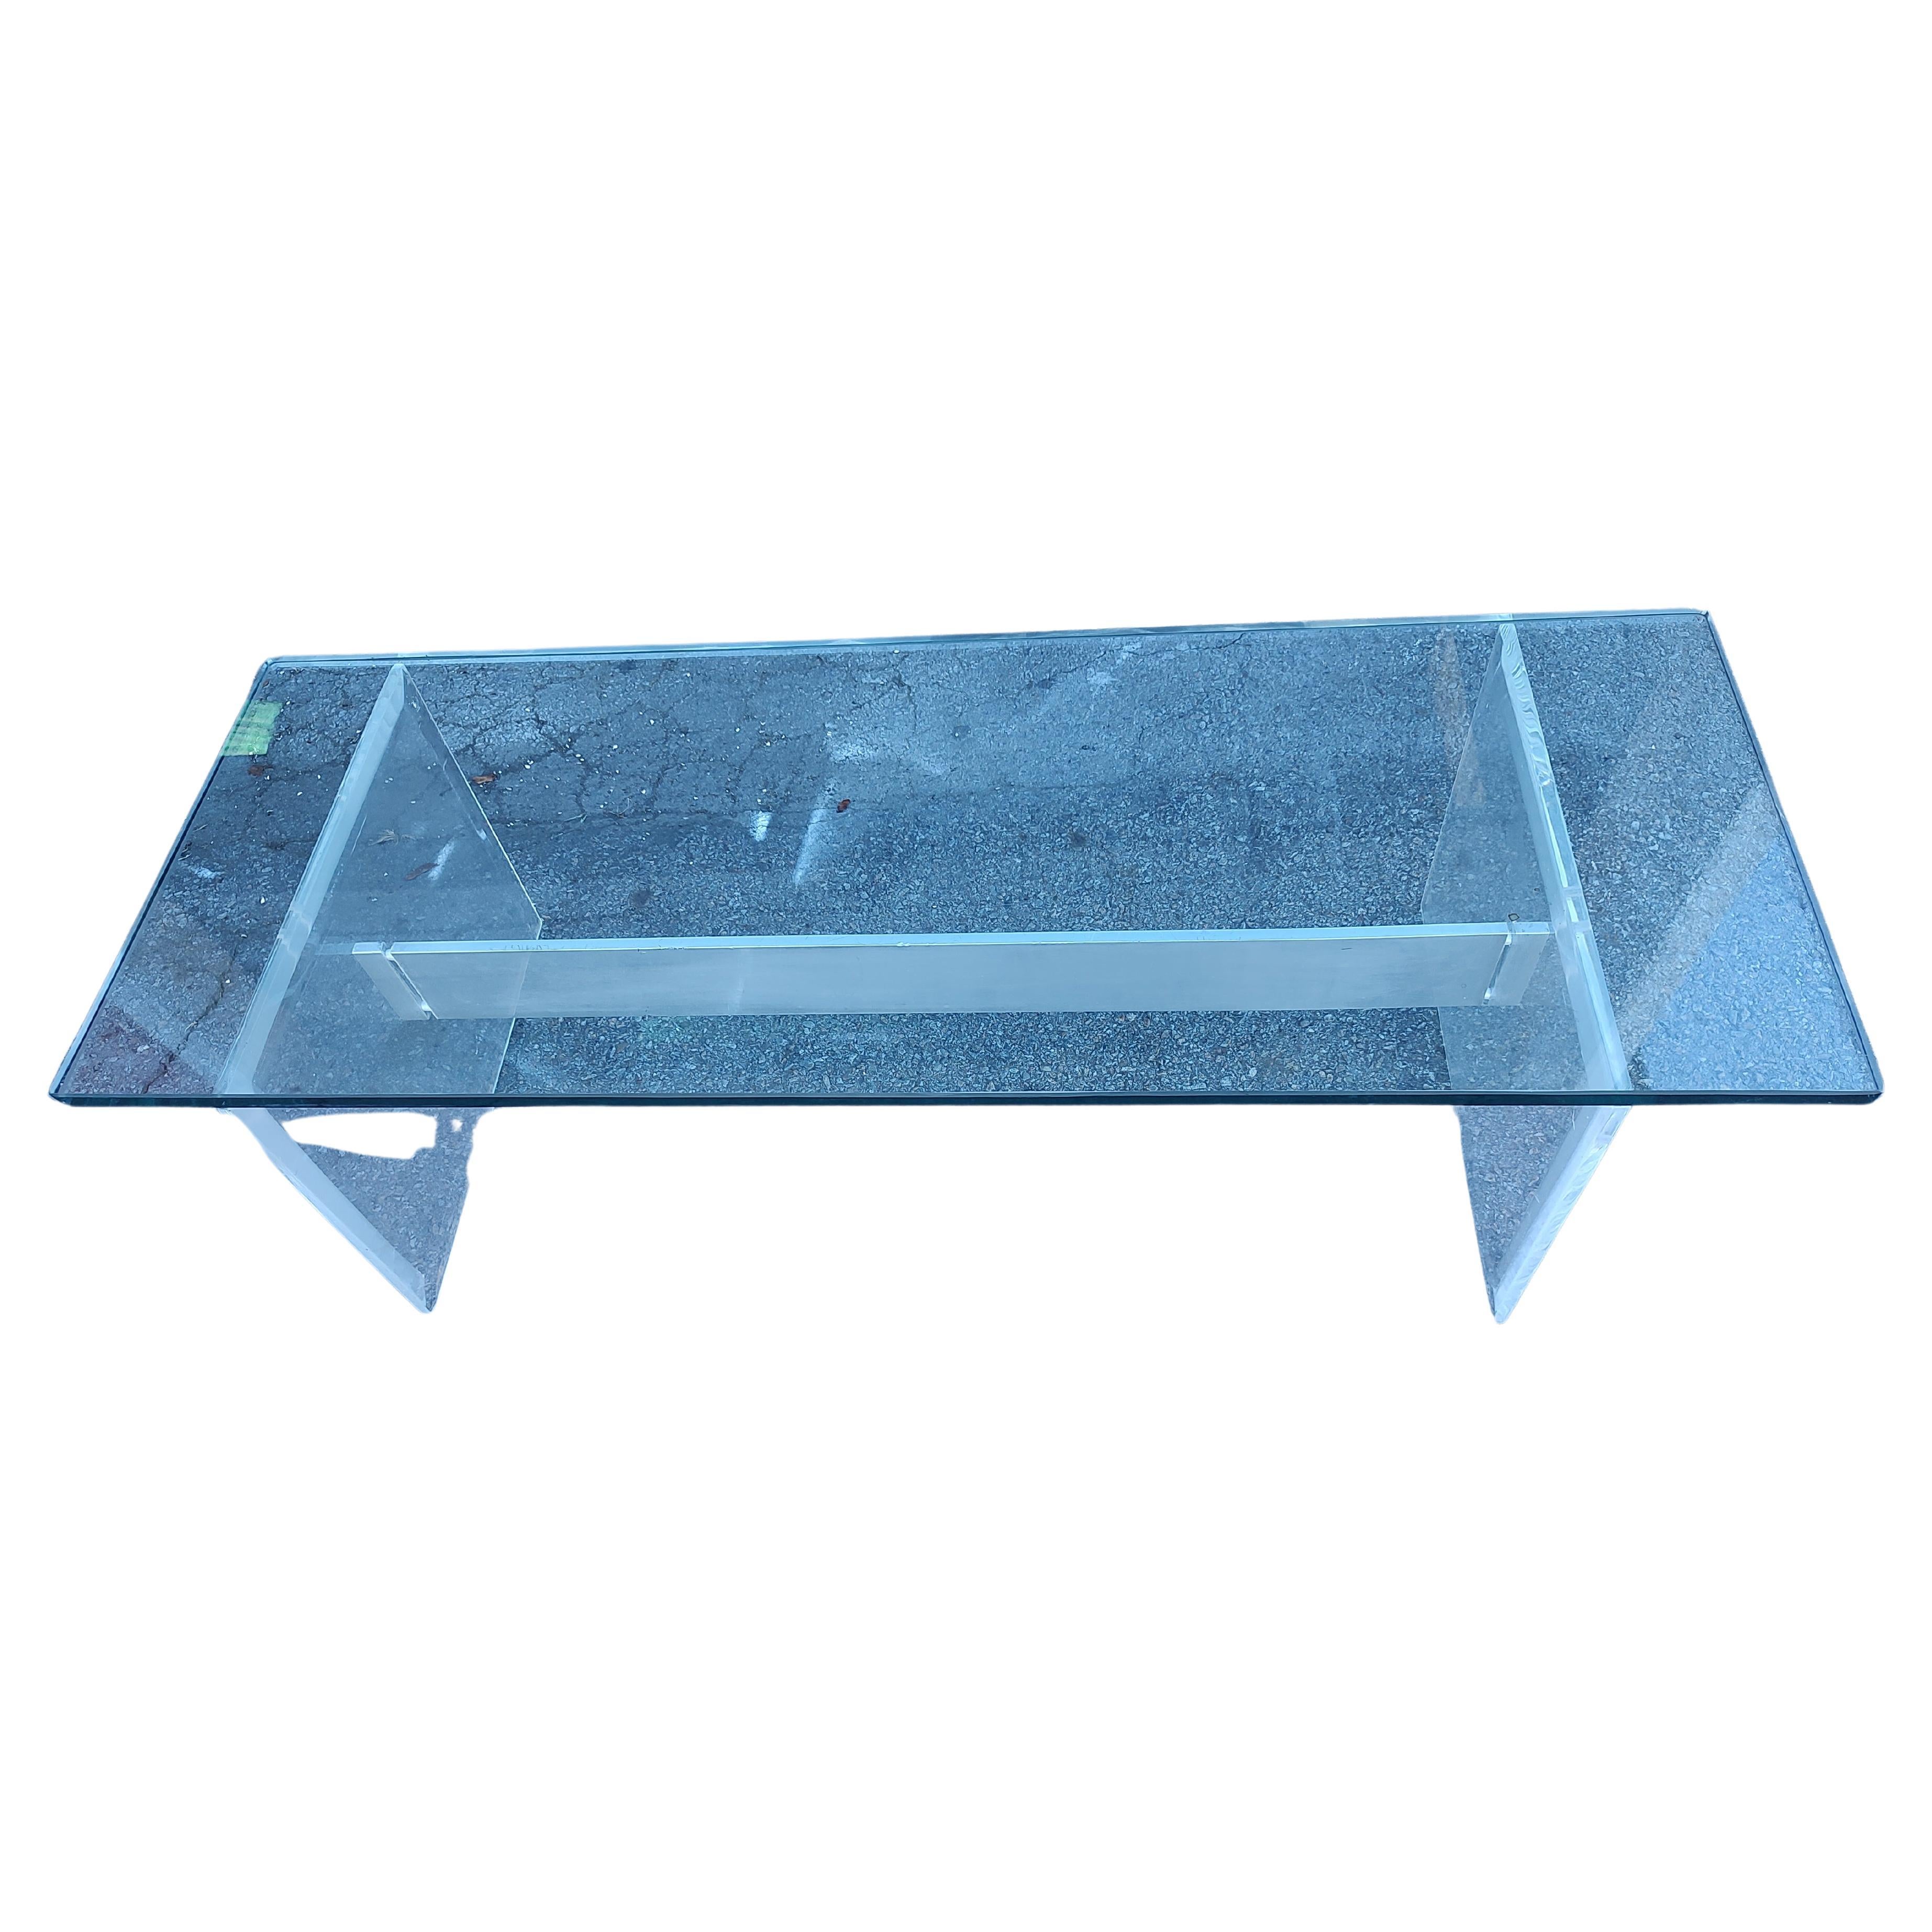 Beveled Mid Century Modern Sculptural Cocktail table with Aluminum and Lucite + Glass For Sale